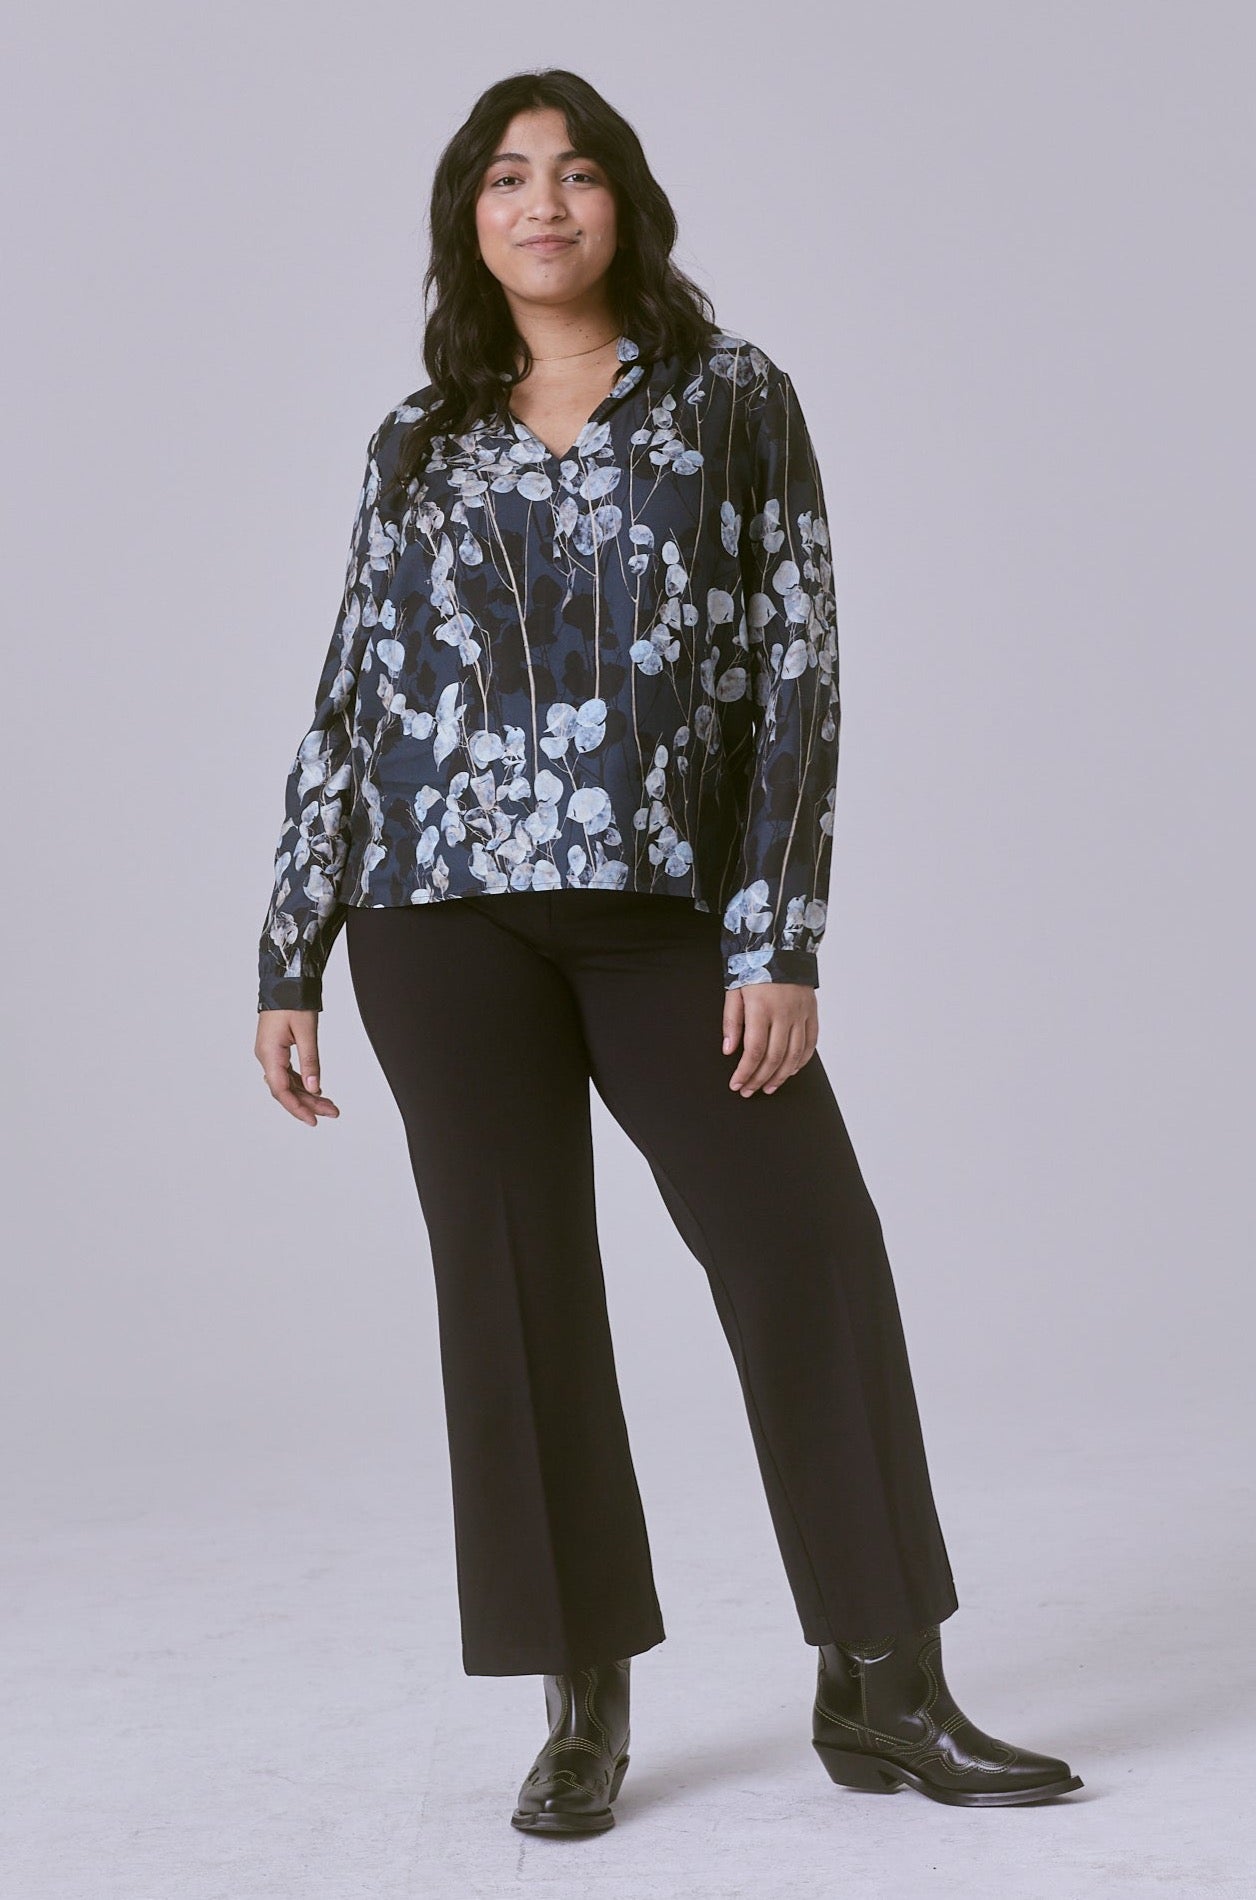 The Long Sleeve Flow Blouse